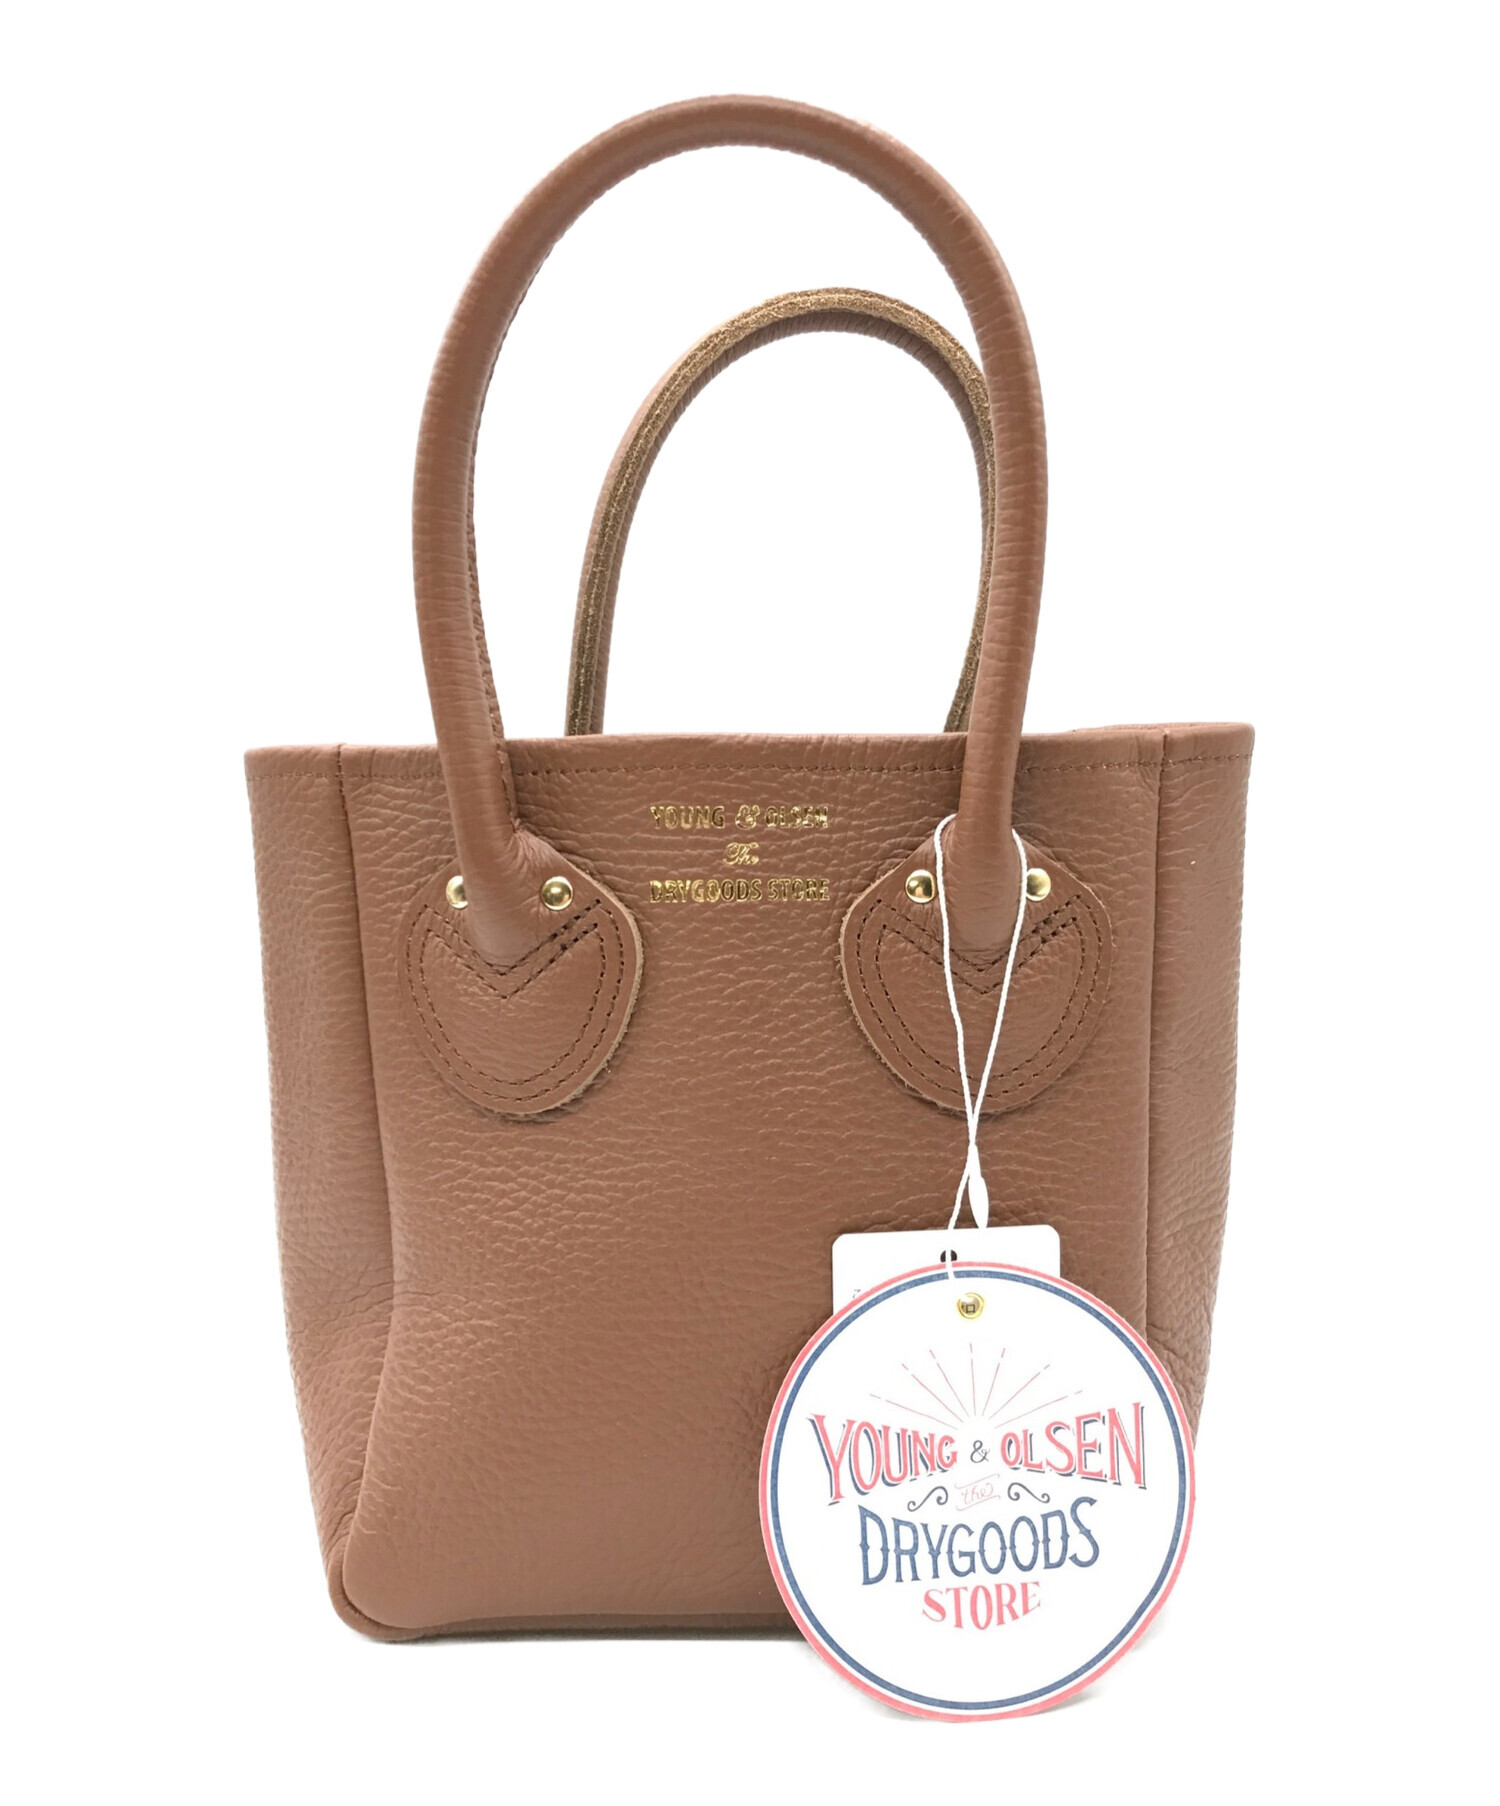 YOUNG & OLSEN The DRYGOODS STORE (ヤングアンドオルセン ザ ドライグッズストア) EMBOSSED LEATHER  TOTE XS エンボスレザートートXS ブラウン 未使用品